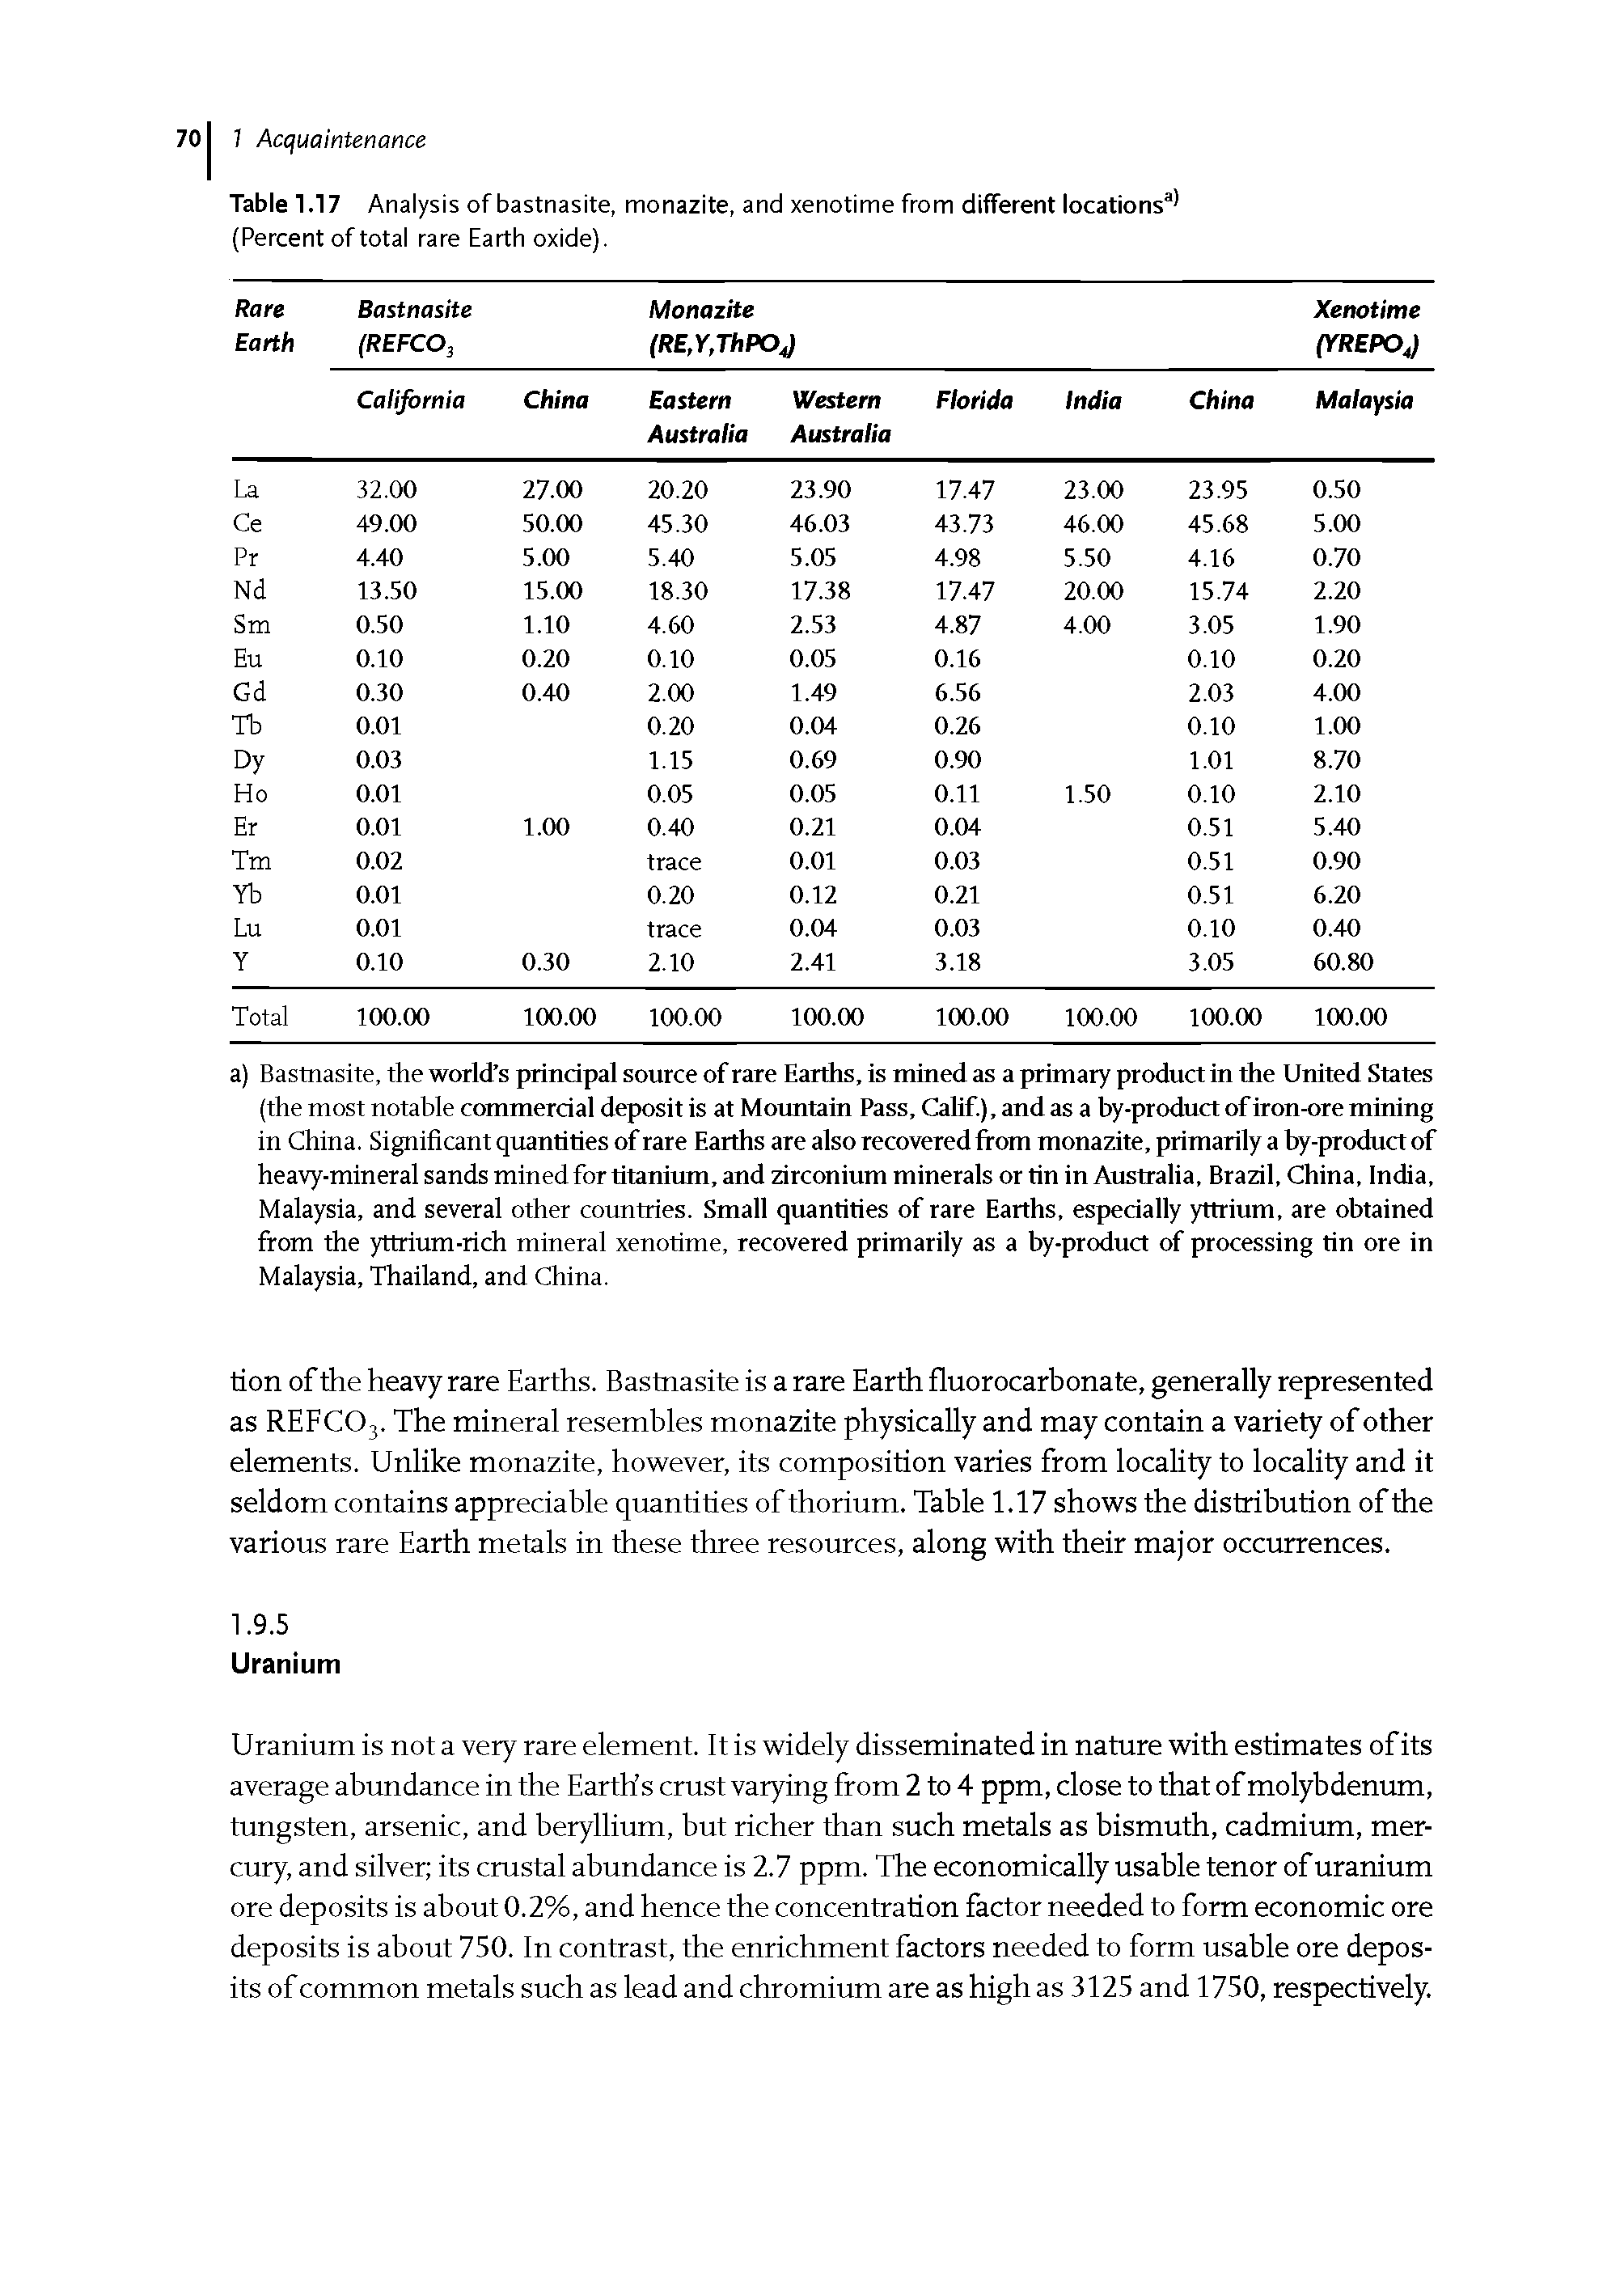 Table 1.17 Analysis of bastnasite, monazite, and xenotime from different locations3 (Percent of total rare Earth oxide).